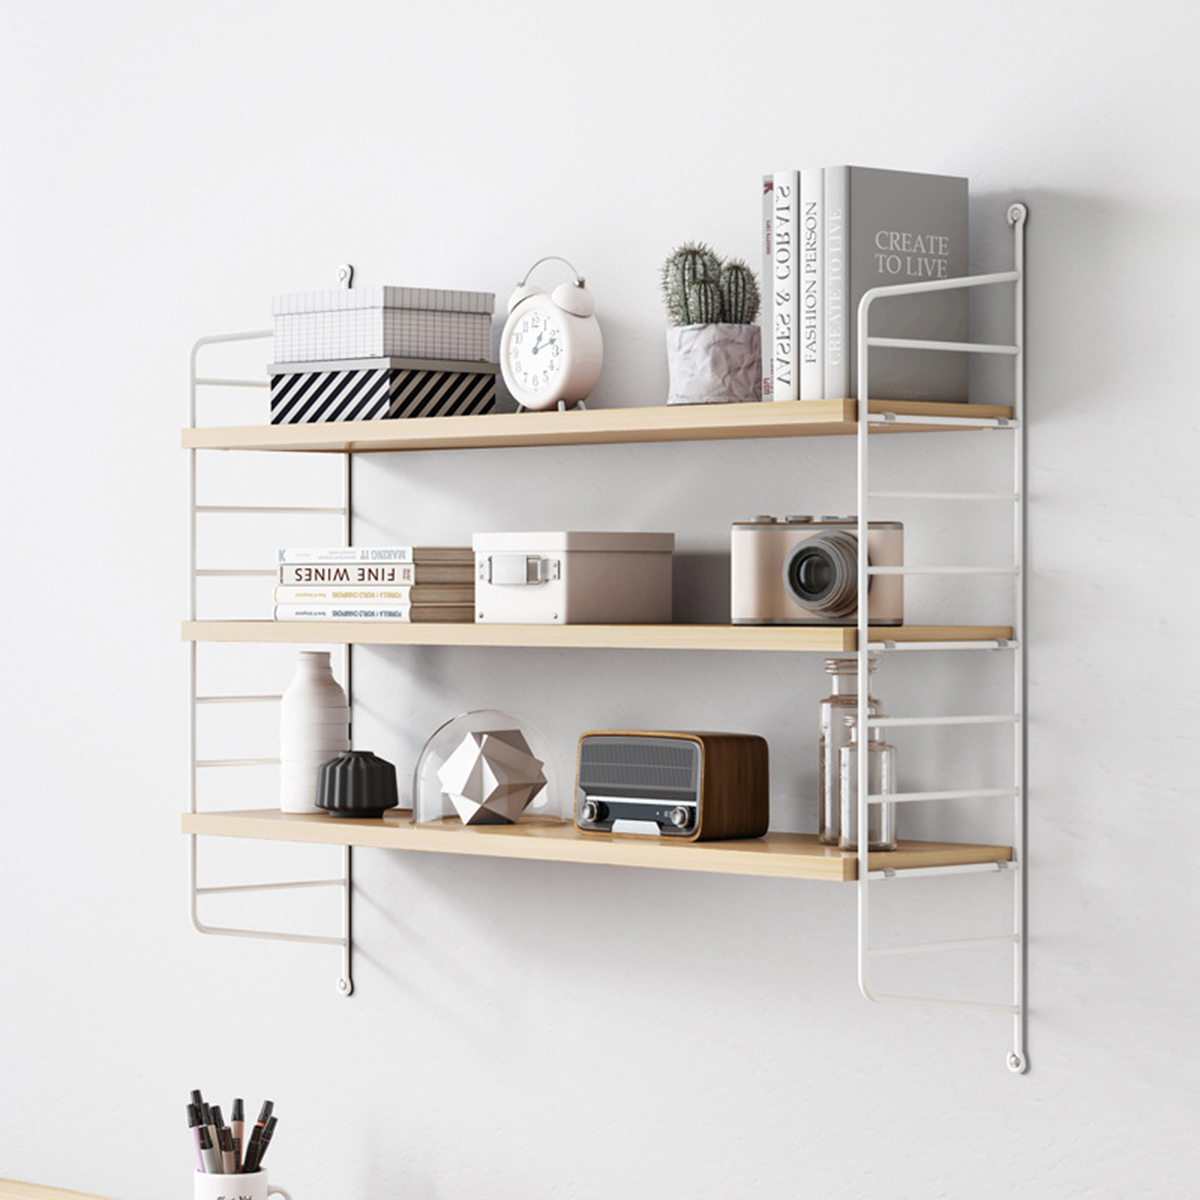 3-Tiers-Wall-Mounted-Shelf-Punch-free-Hanging-Storage-Rack-Bedroom-Bookshelf-Home-Office-Decoration--1788421-2